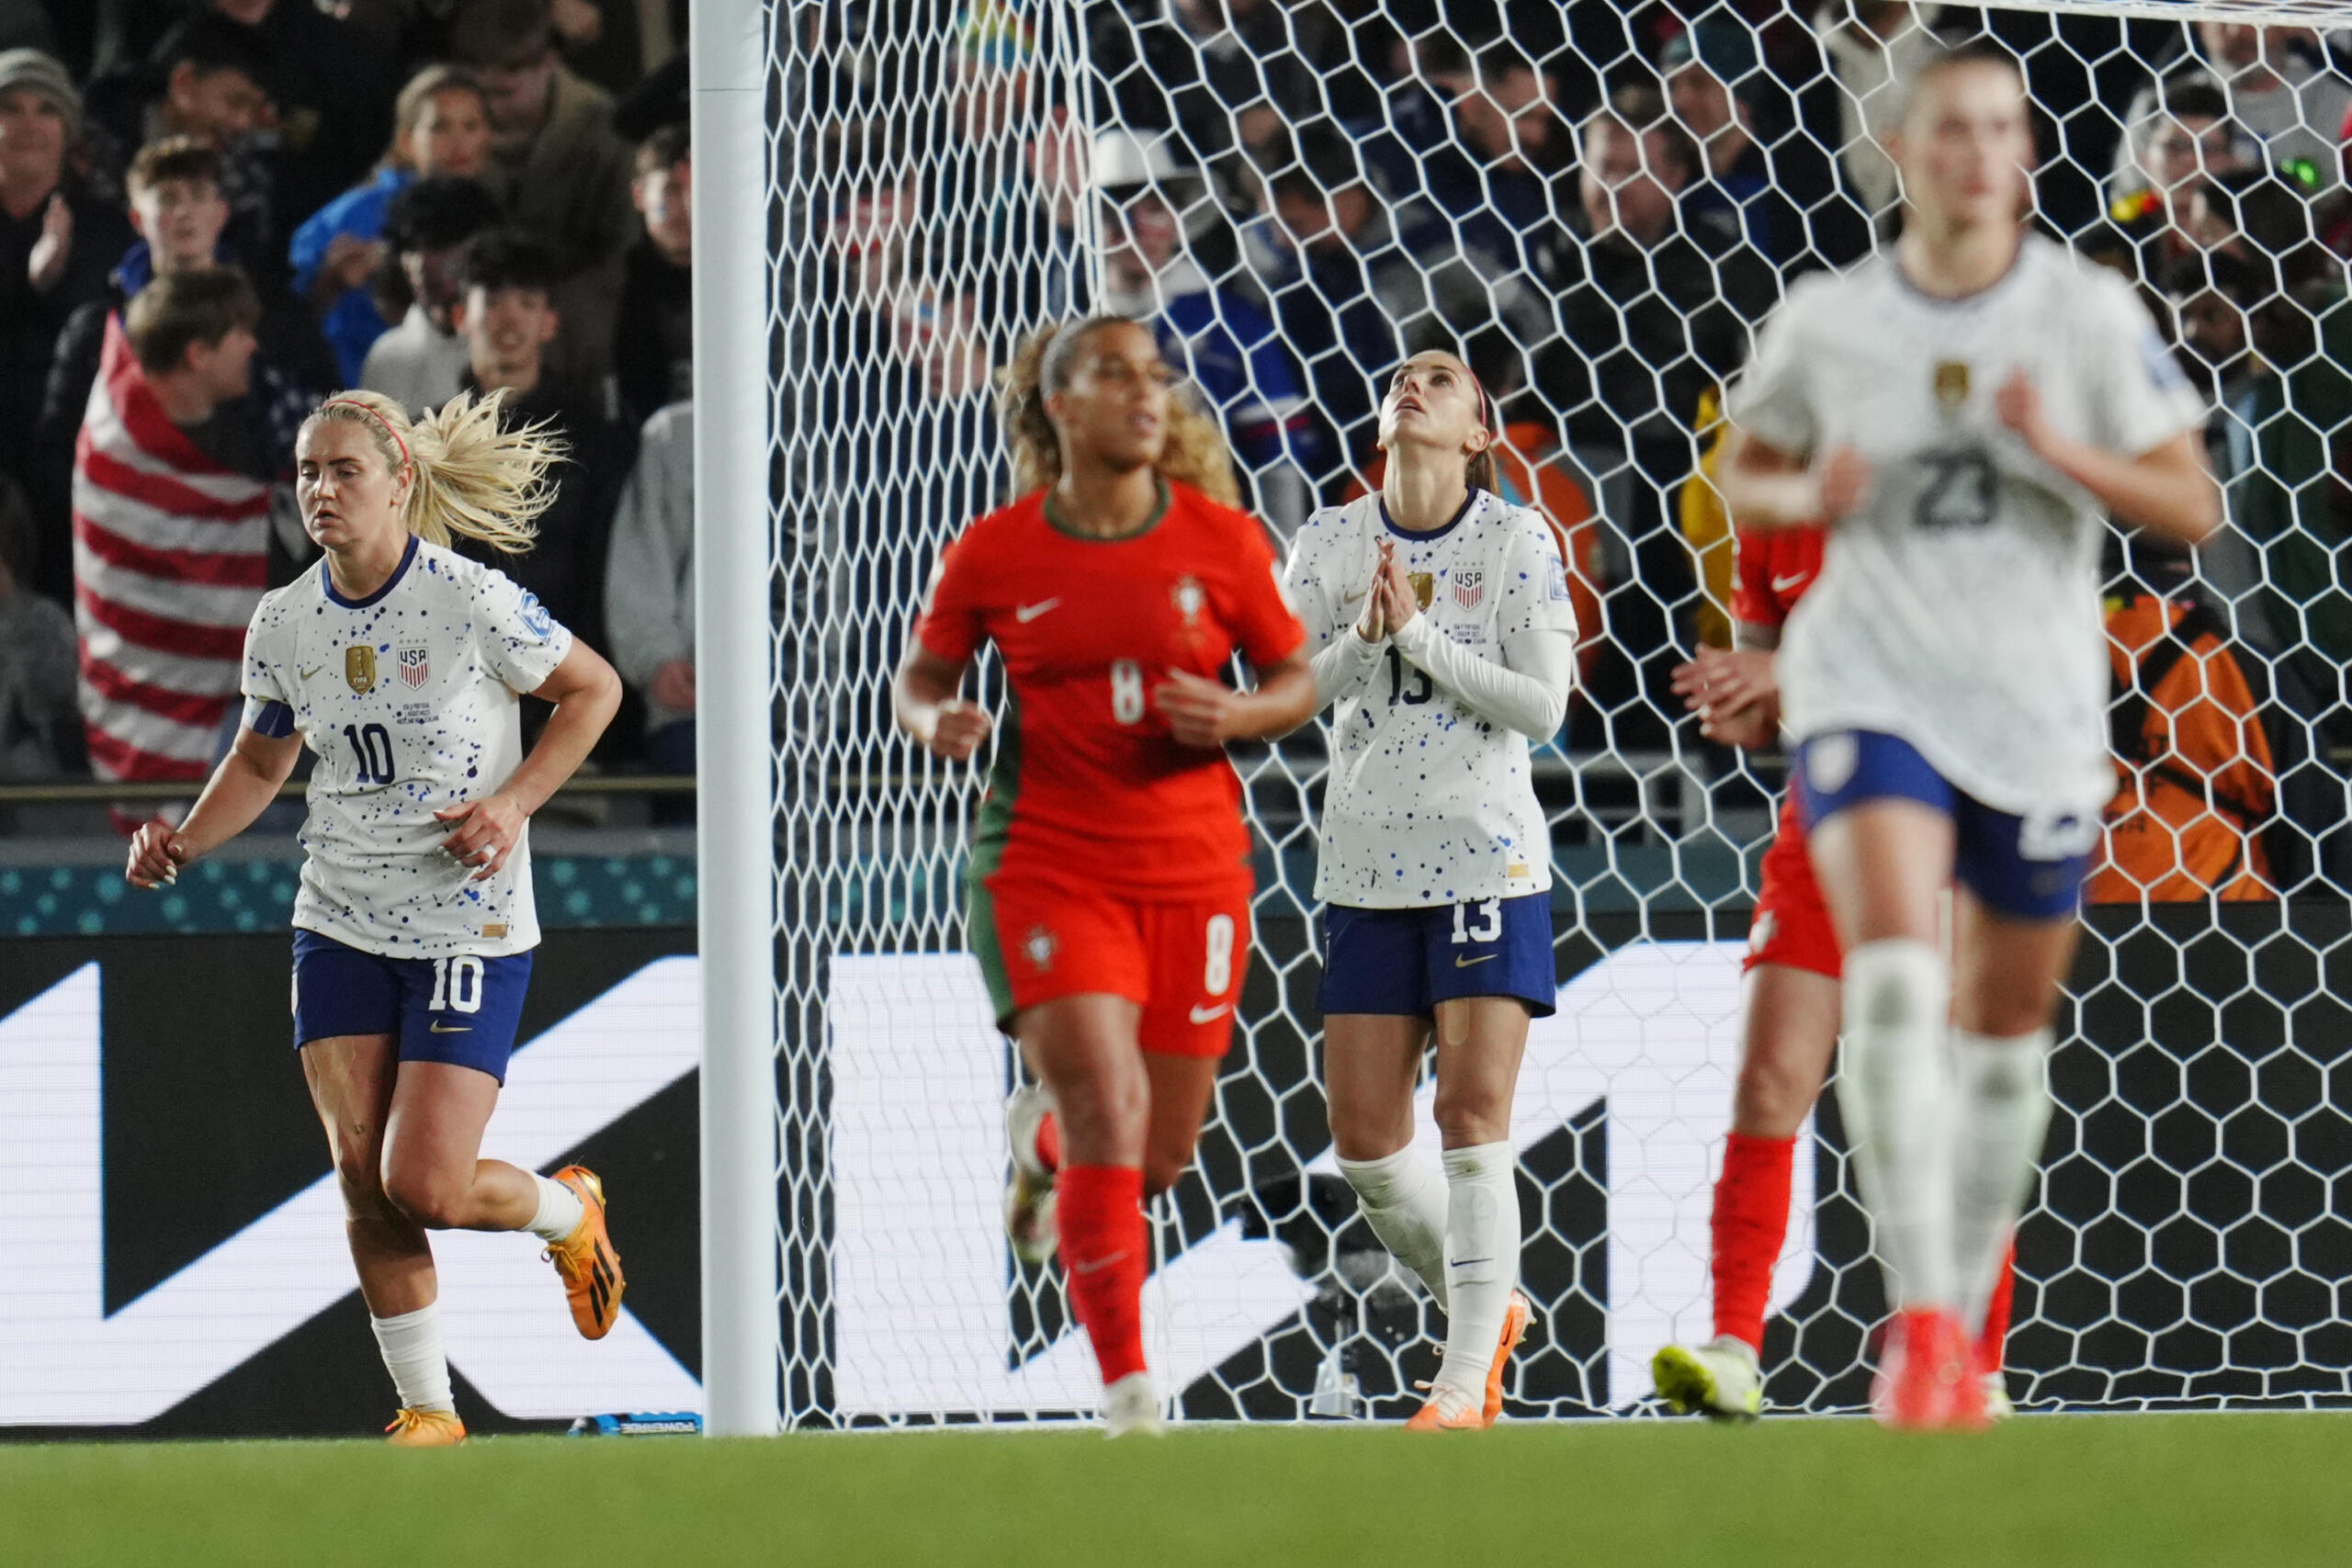 United States' Alex Morgan, center, reacts after missing a shot during the second half of the FIFA Women's World Cup Group E soccer match between Portugal and the United States at Eden Park in Auckland, New Zealand, Tuesday, Aug. 1, 2023.